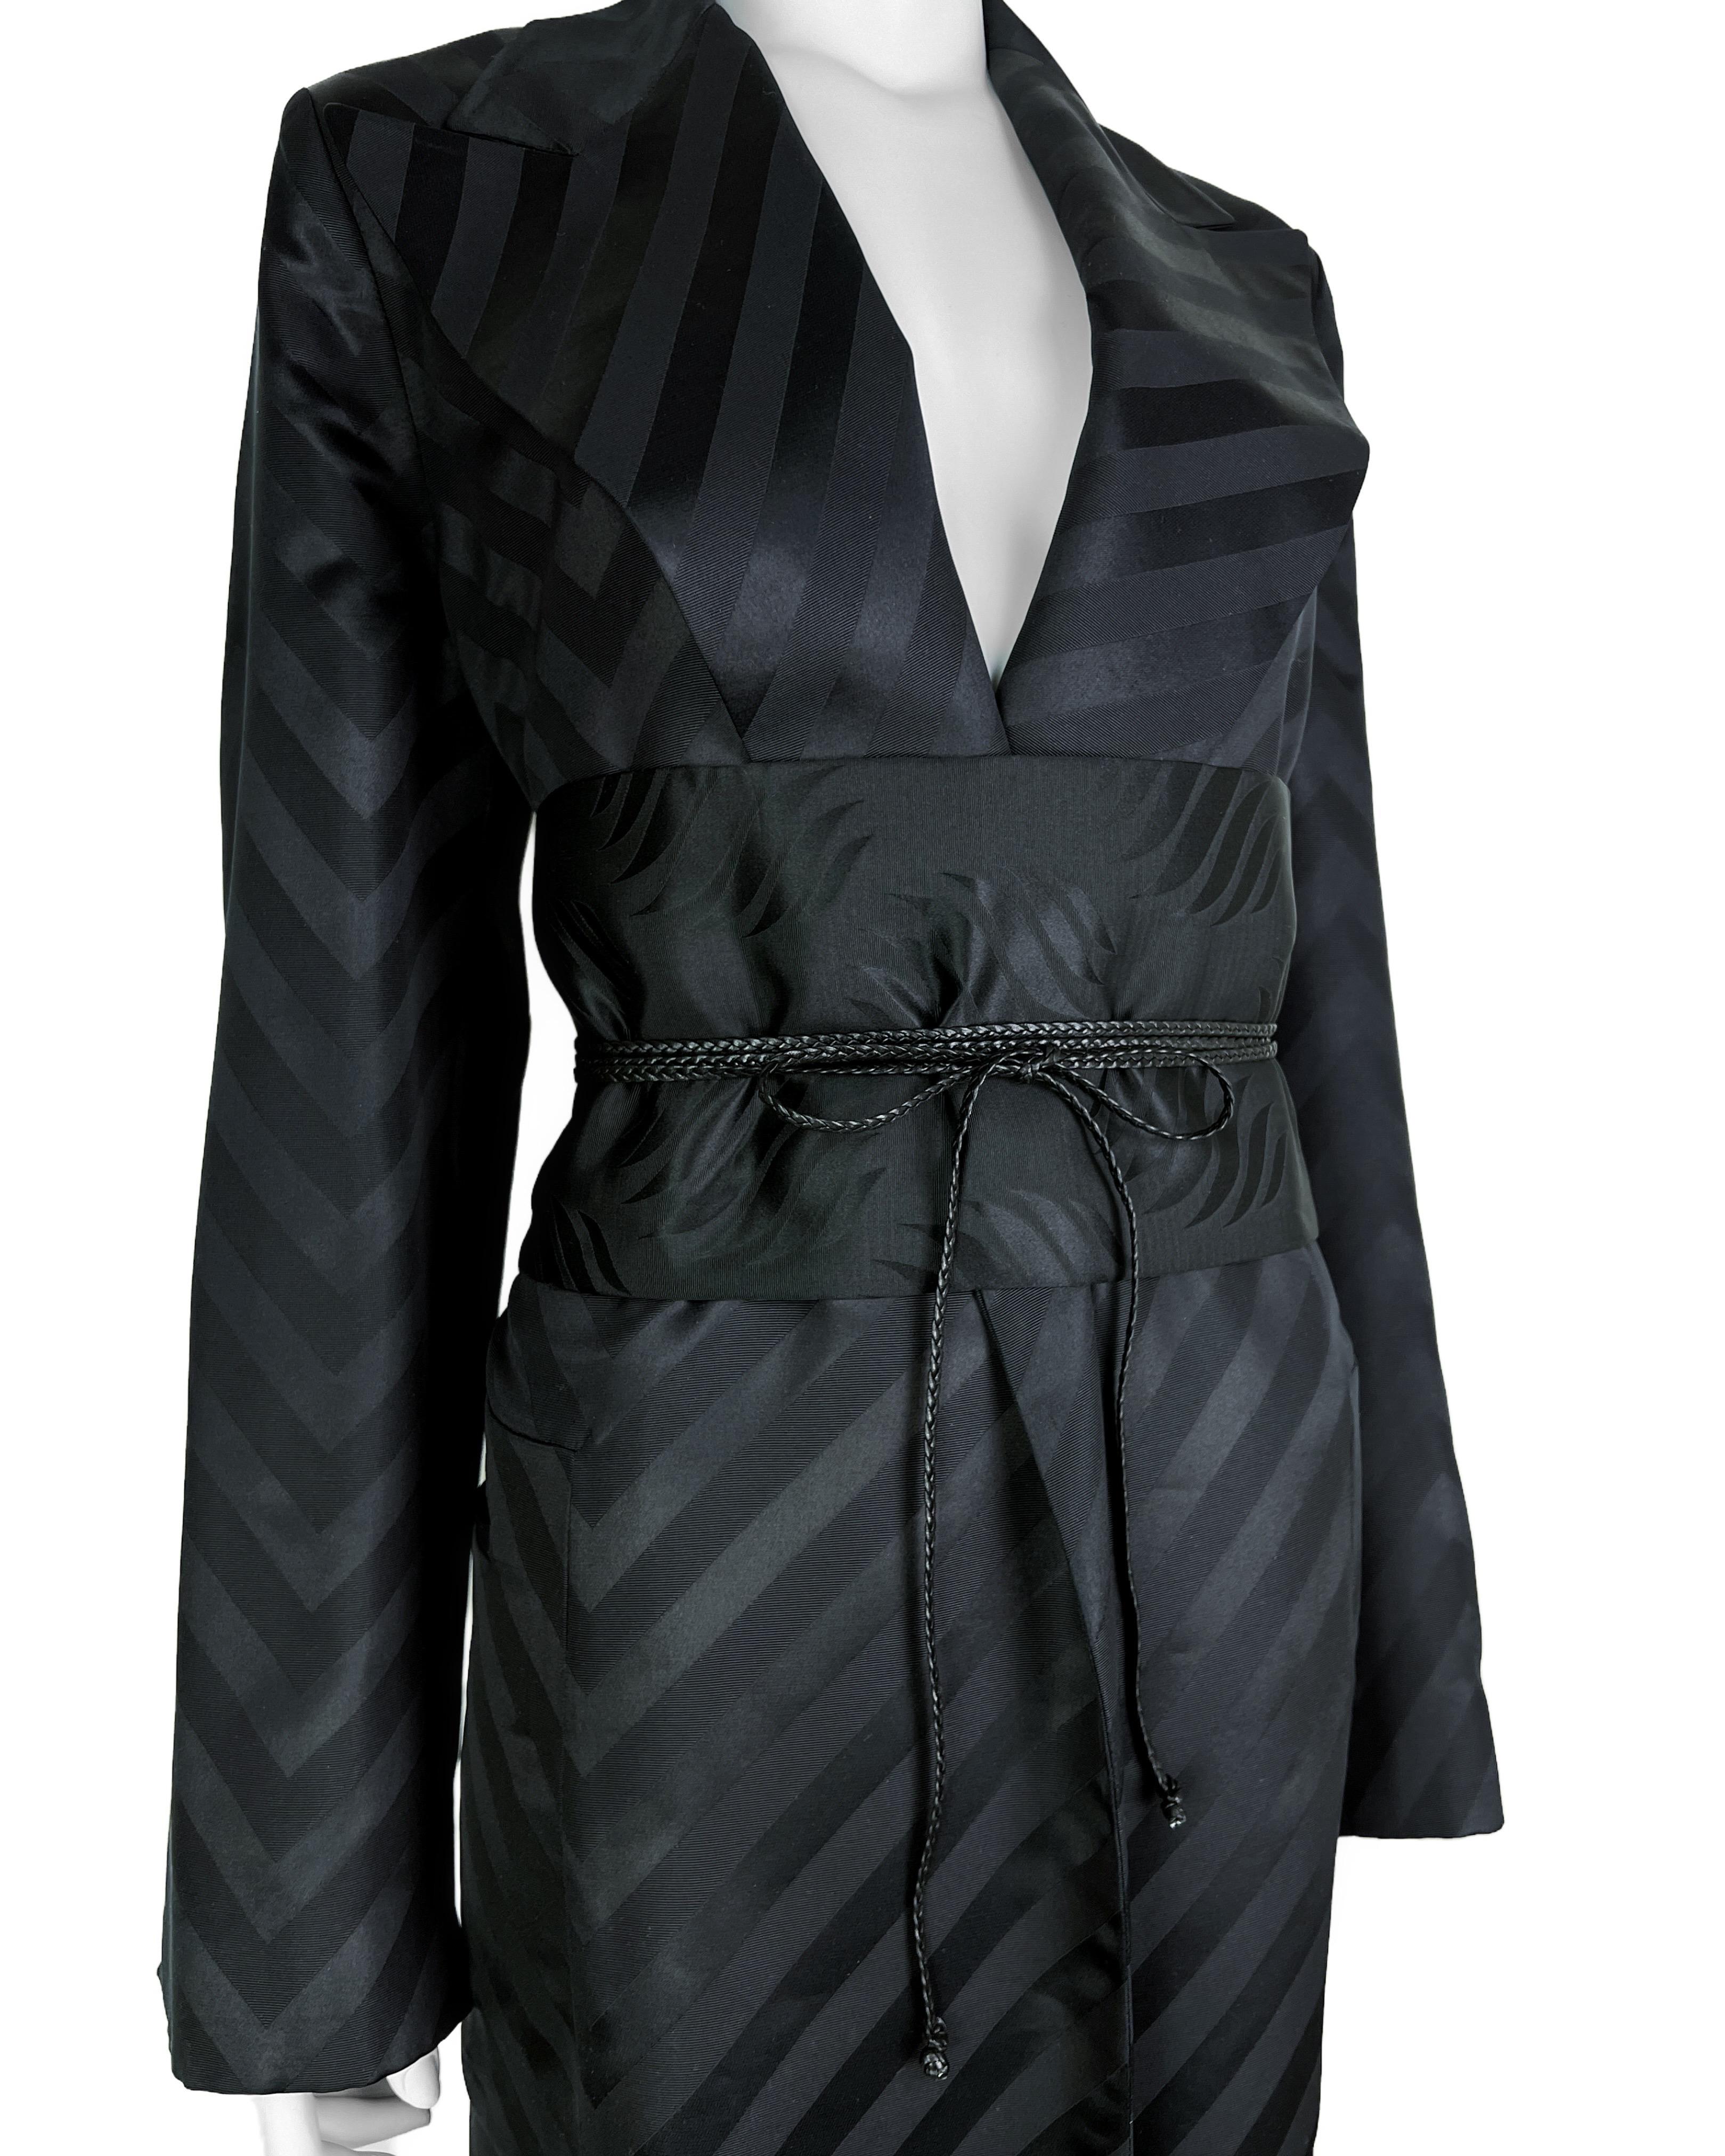 Gucci by Tom Ford Fall 2002 Kimono and Belt Runway Look In Excellent Condition For Sale In Prague, CZ